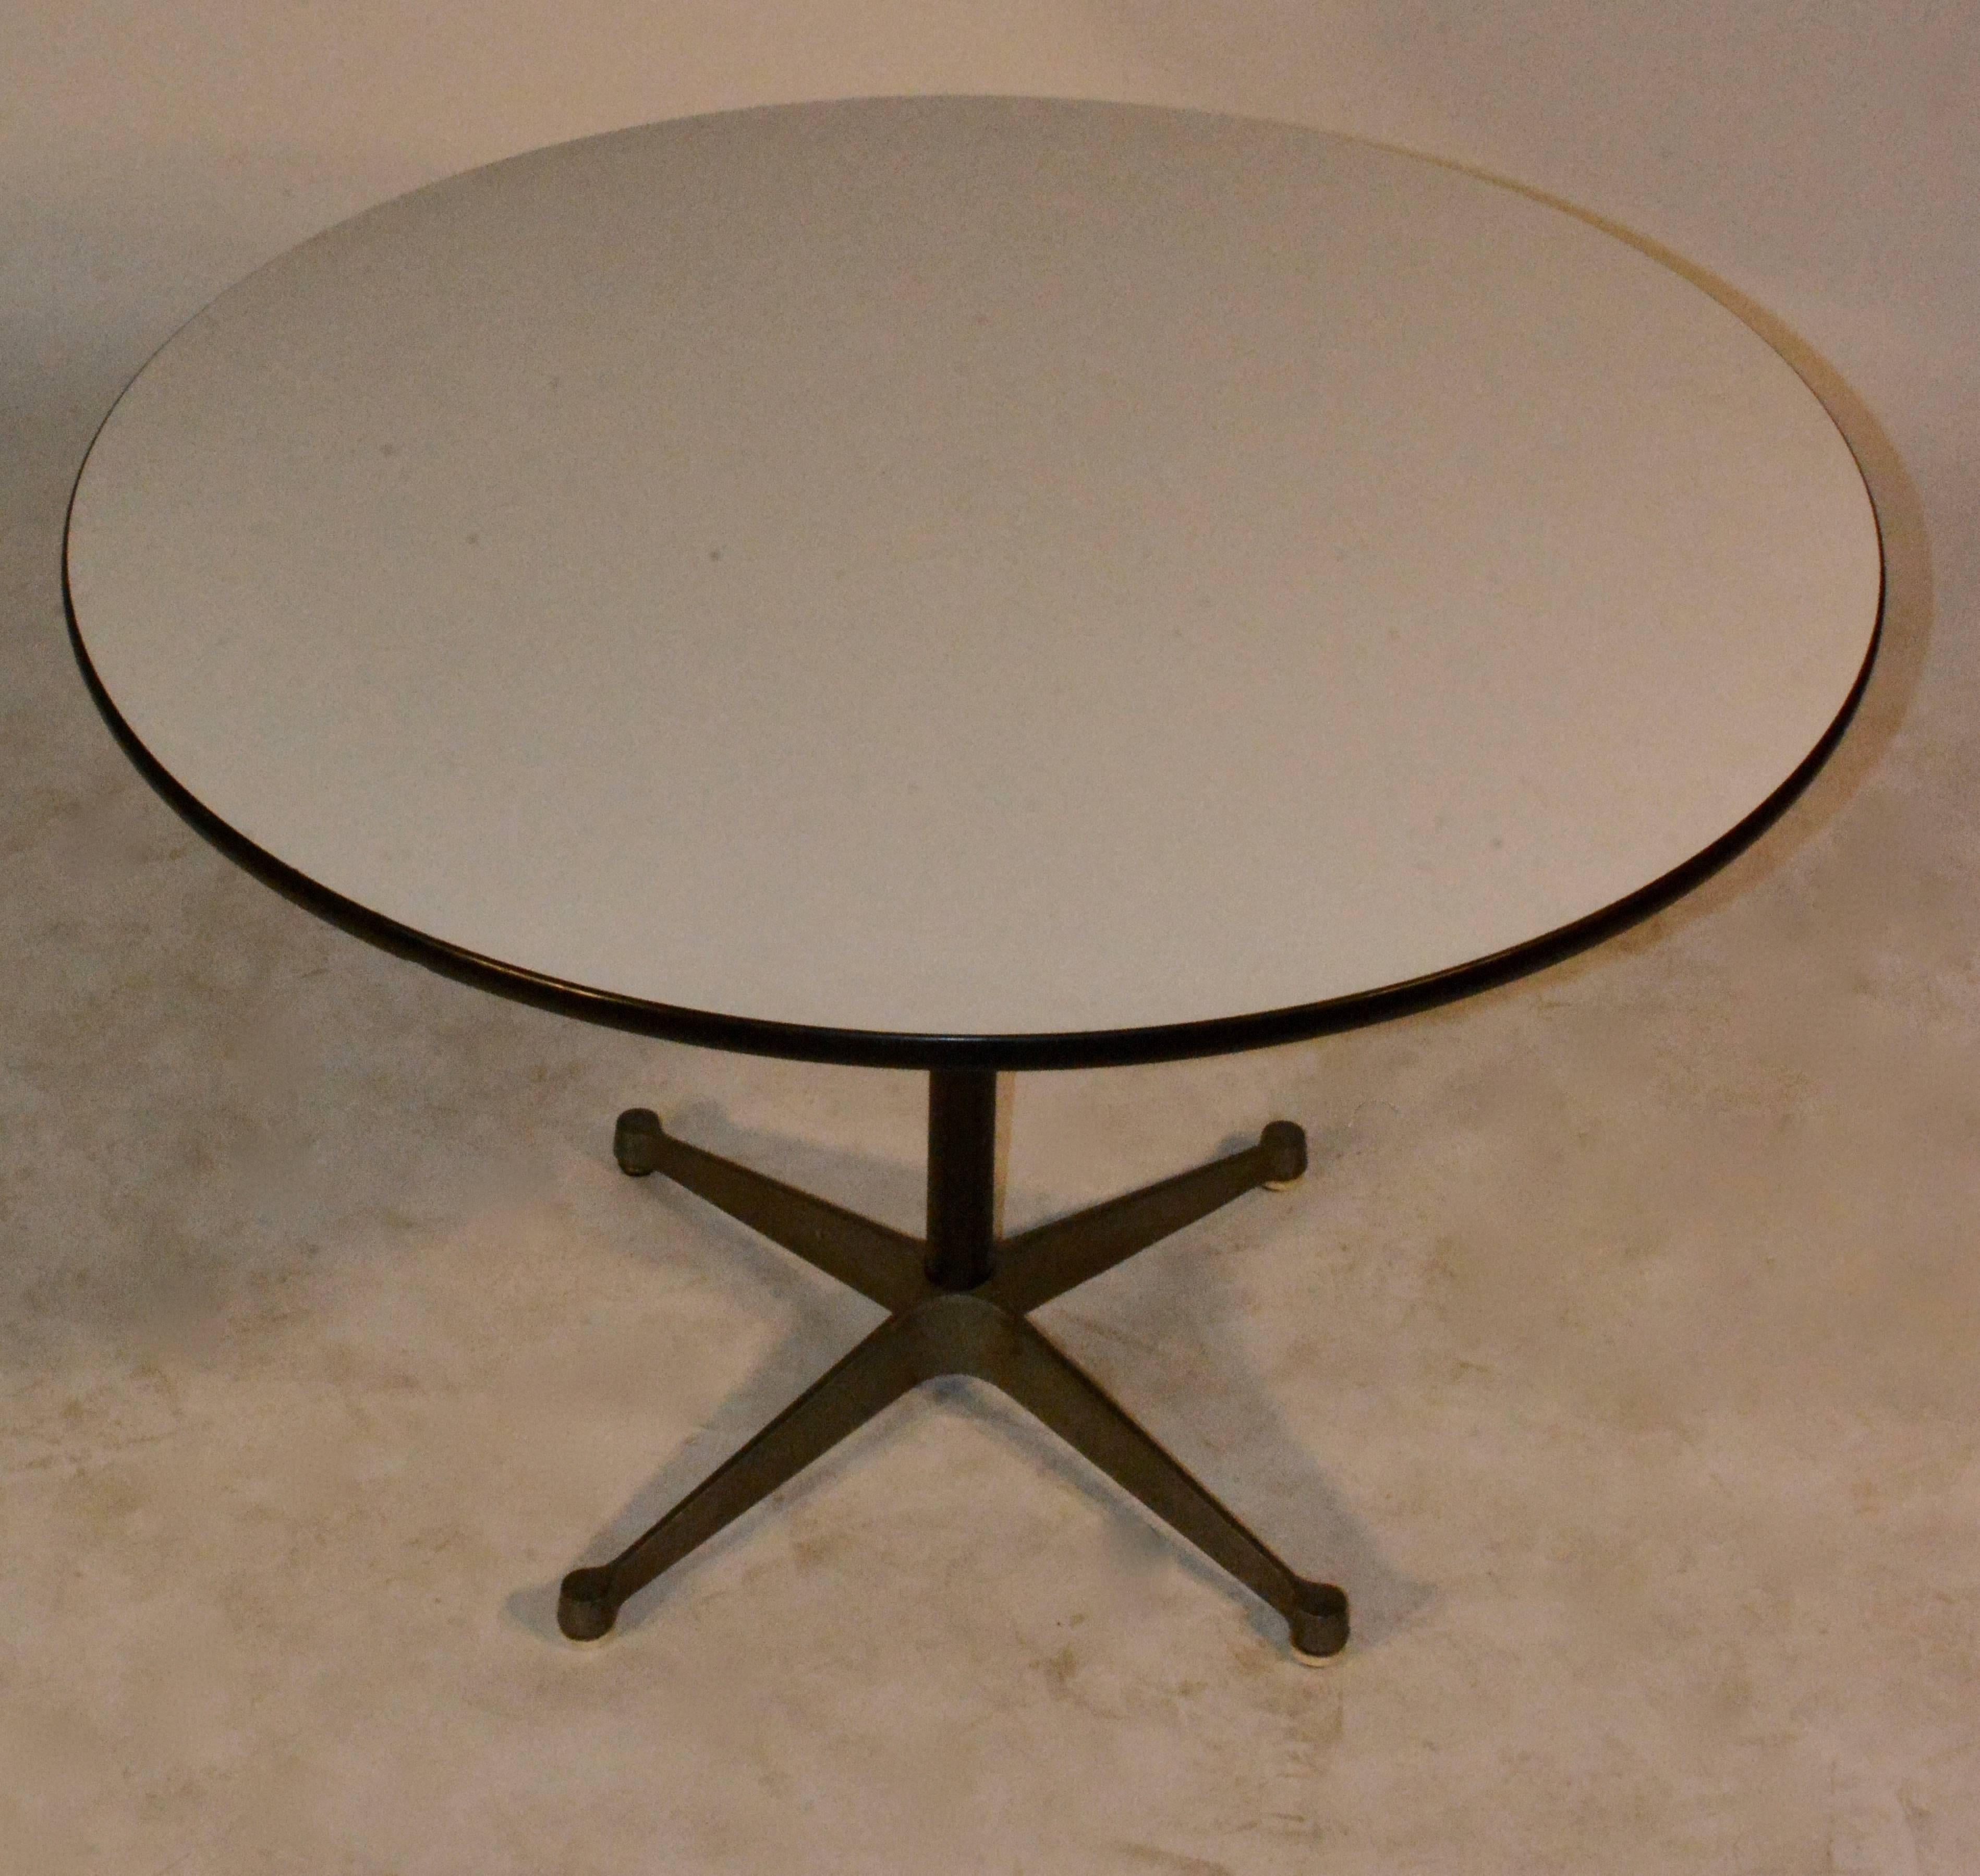 A midcentury Eames Aluminium group dining table by Herman Miller. The table features a round, white laminate top above a cylindrical, steel support ending in a four-point, aluminium base. The underside of the top retains a sticker for “Herman